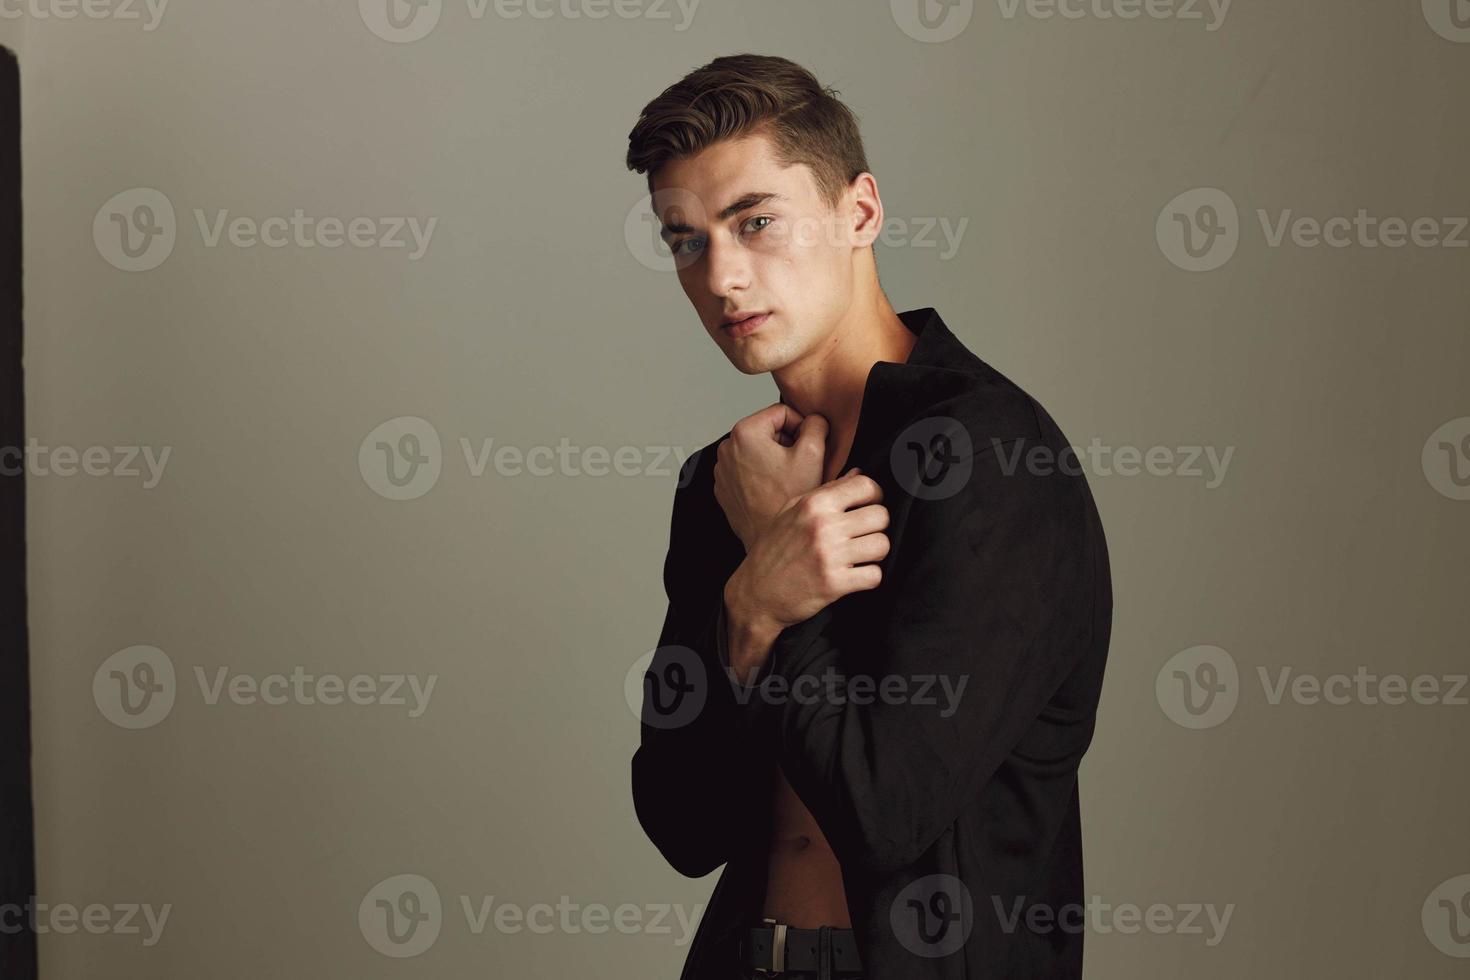 Cute young guy and fashionable hairstyle black shirt self-confidence photo